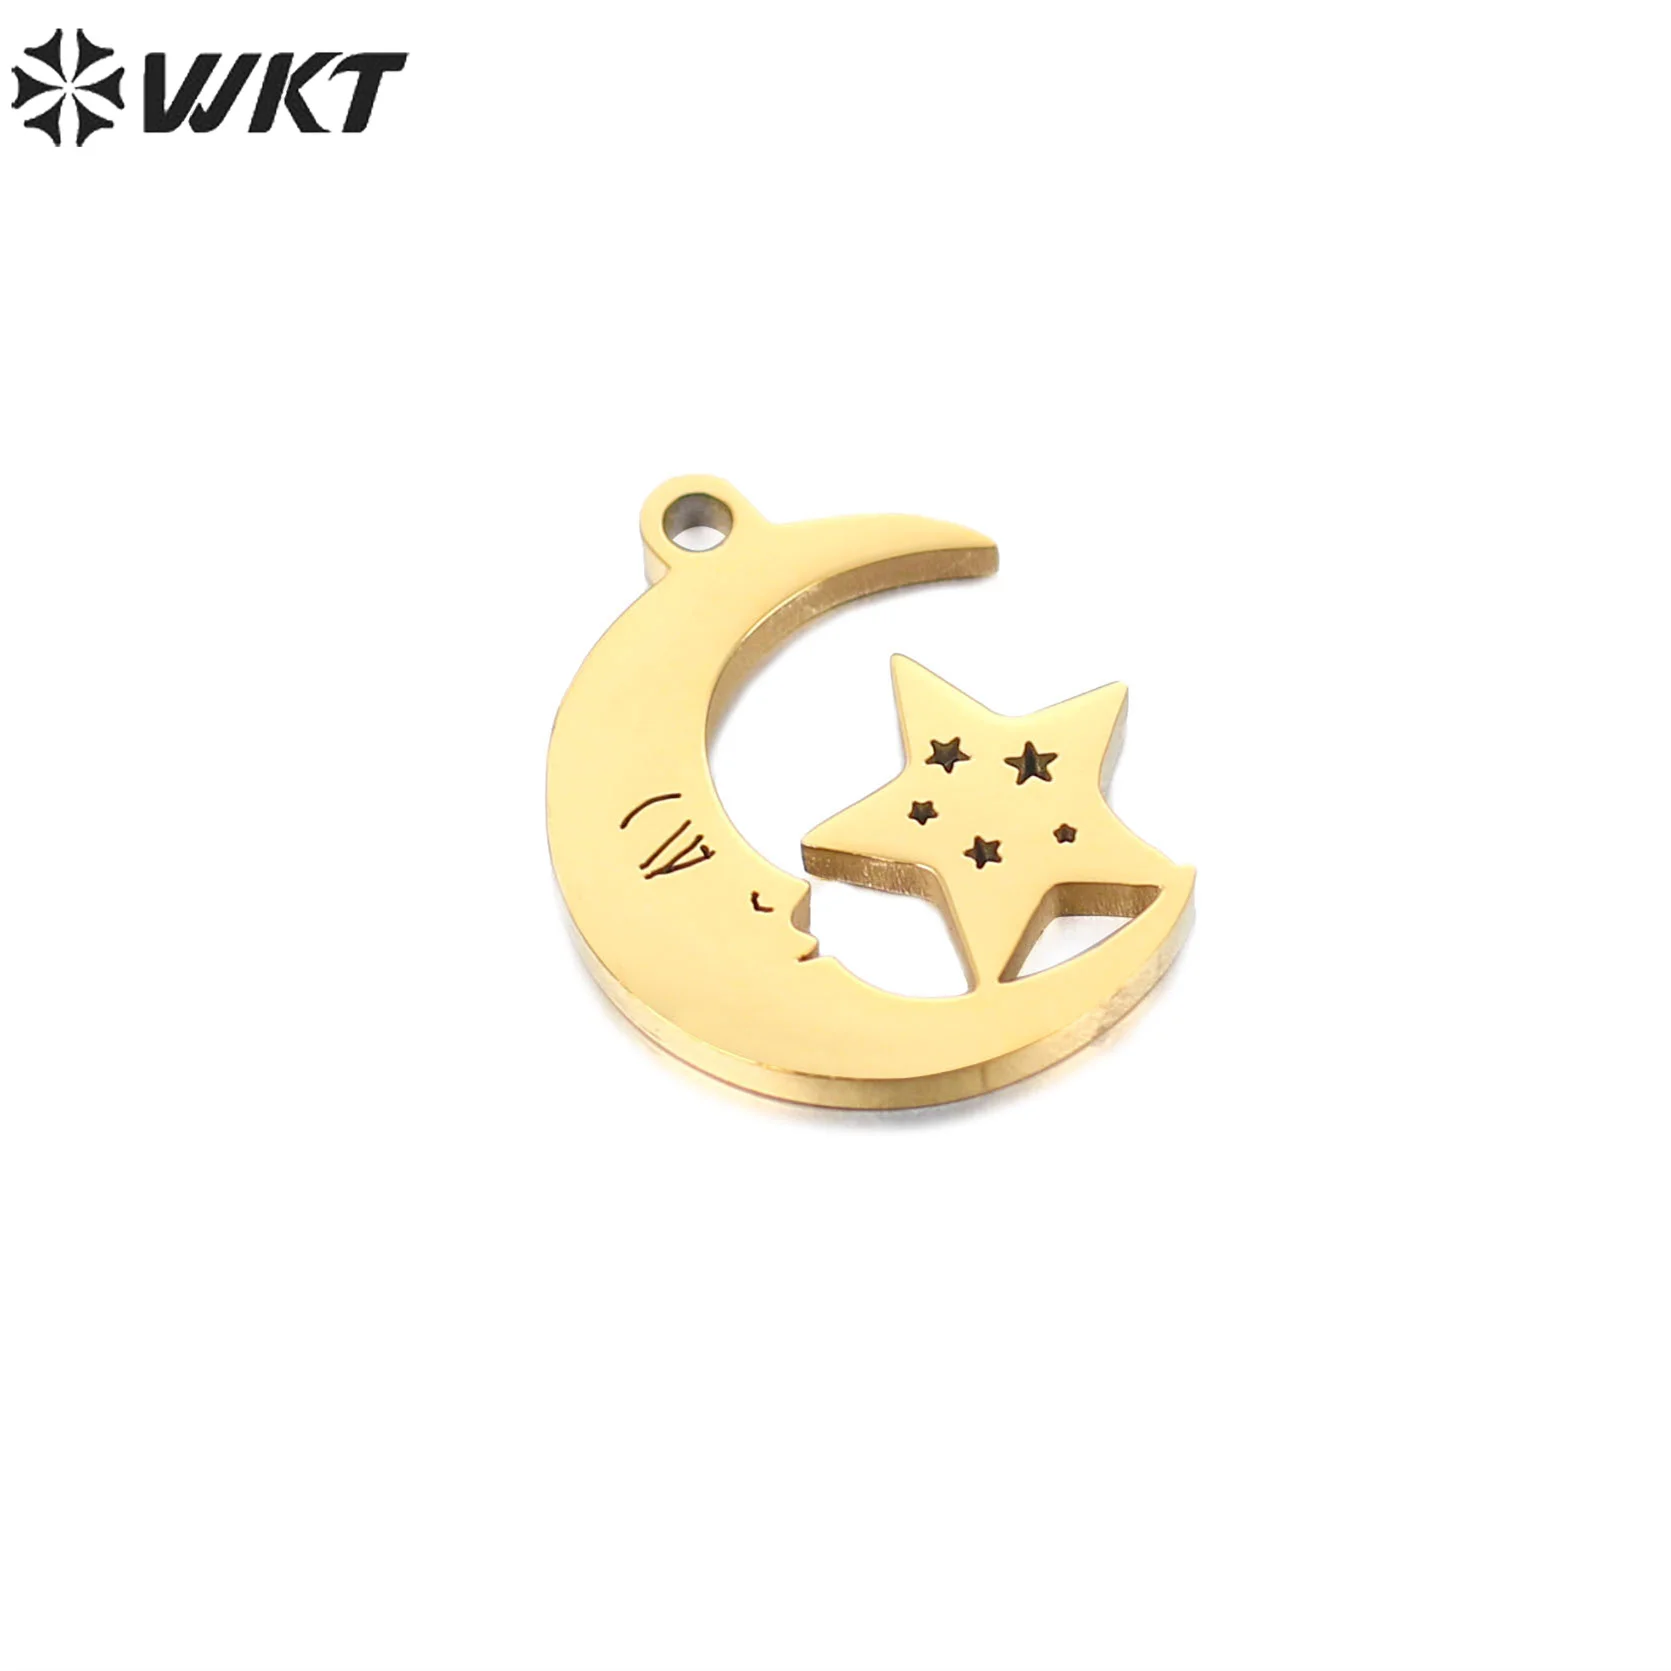 

WT-SSP036 WKT 2022 romantic moon and stars shape Stainless steel fashion cute pendant trend accessories gift party lady